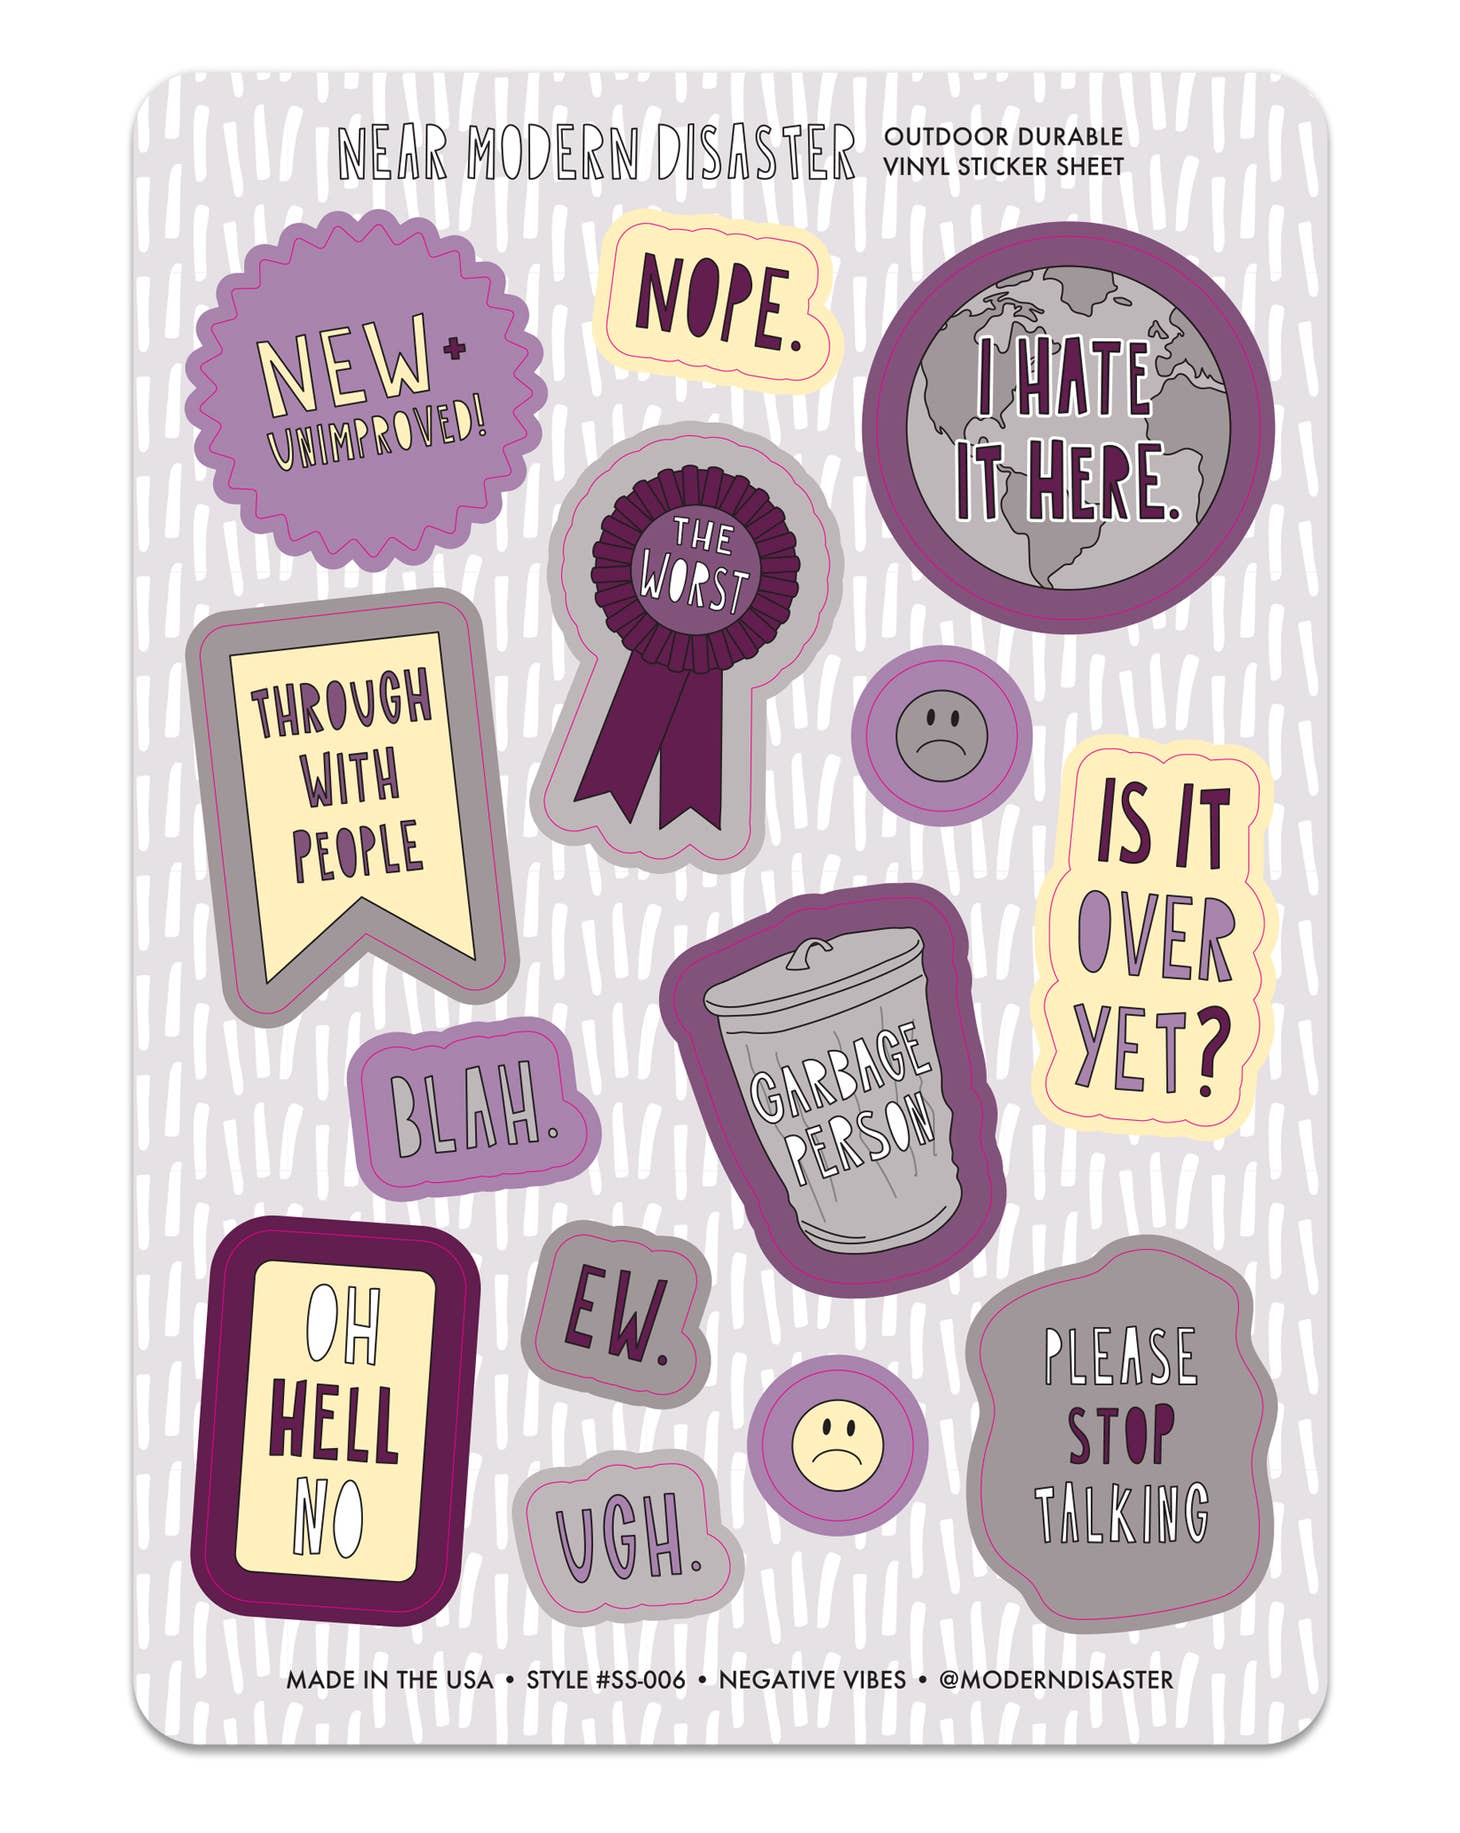 Lavender and white background with images of shapes with negative sayings in purple, cream, black and grey saying, “through with people, I hate it here, is it over yet?, nope, oh hell no”.    